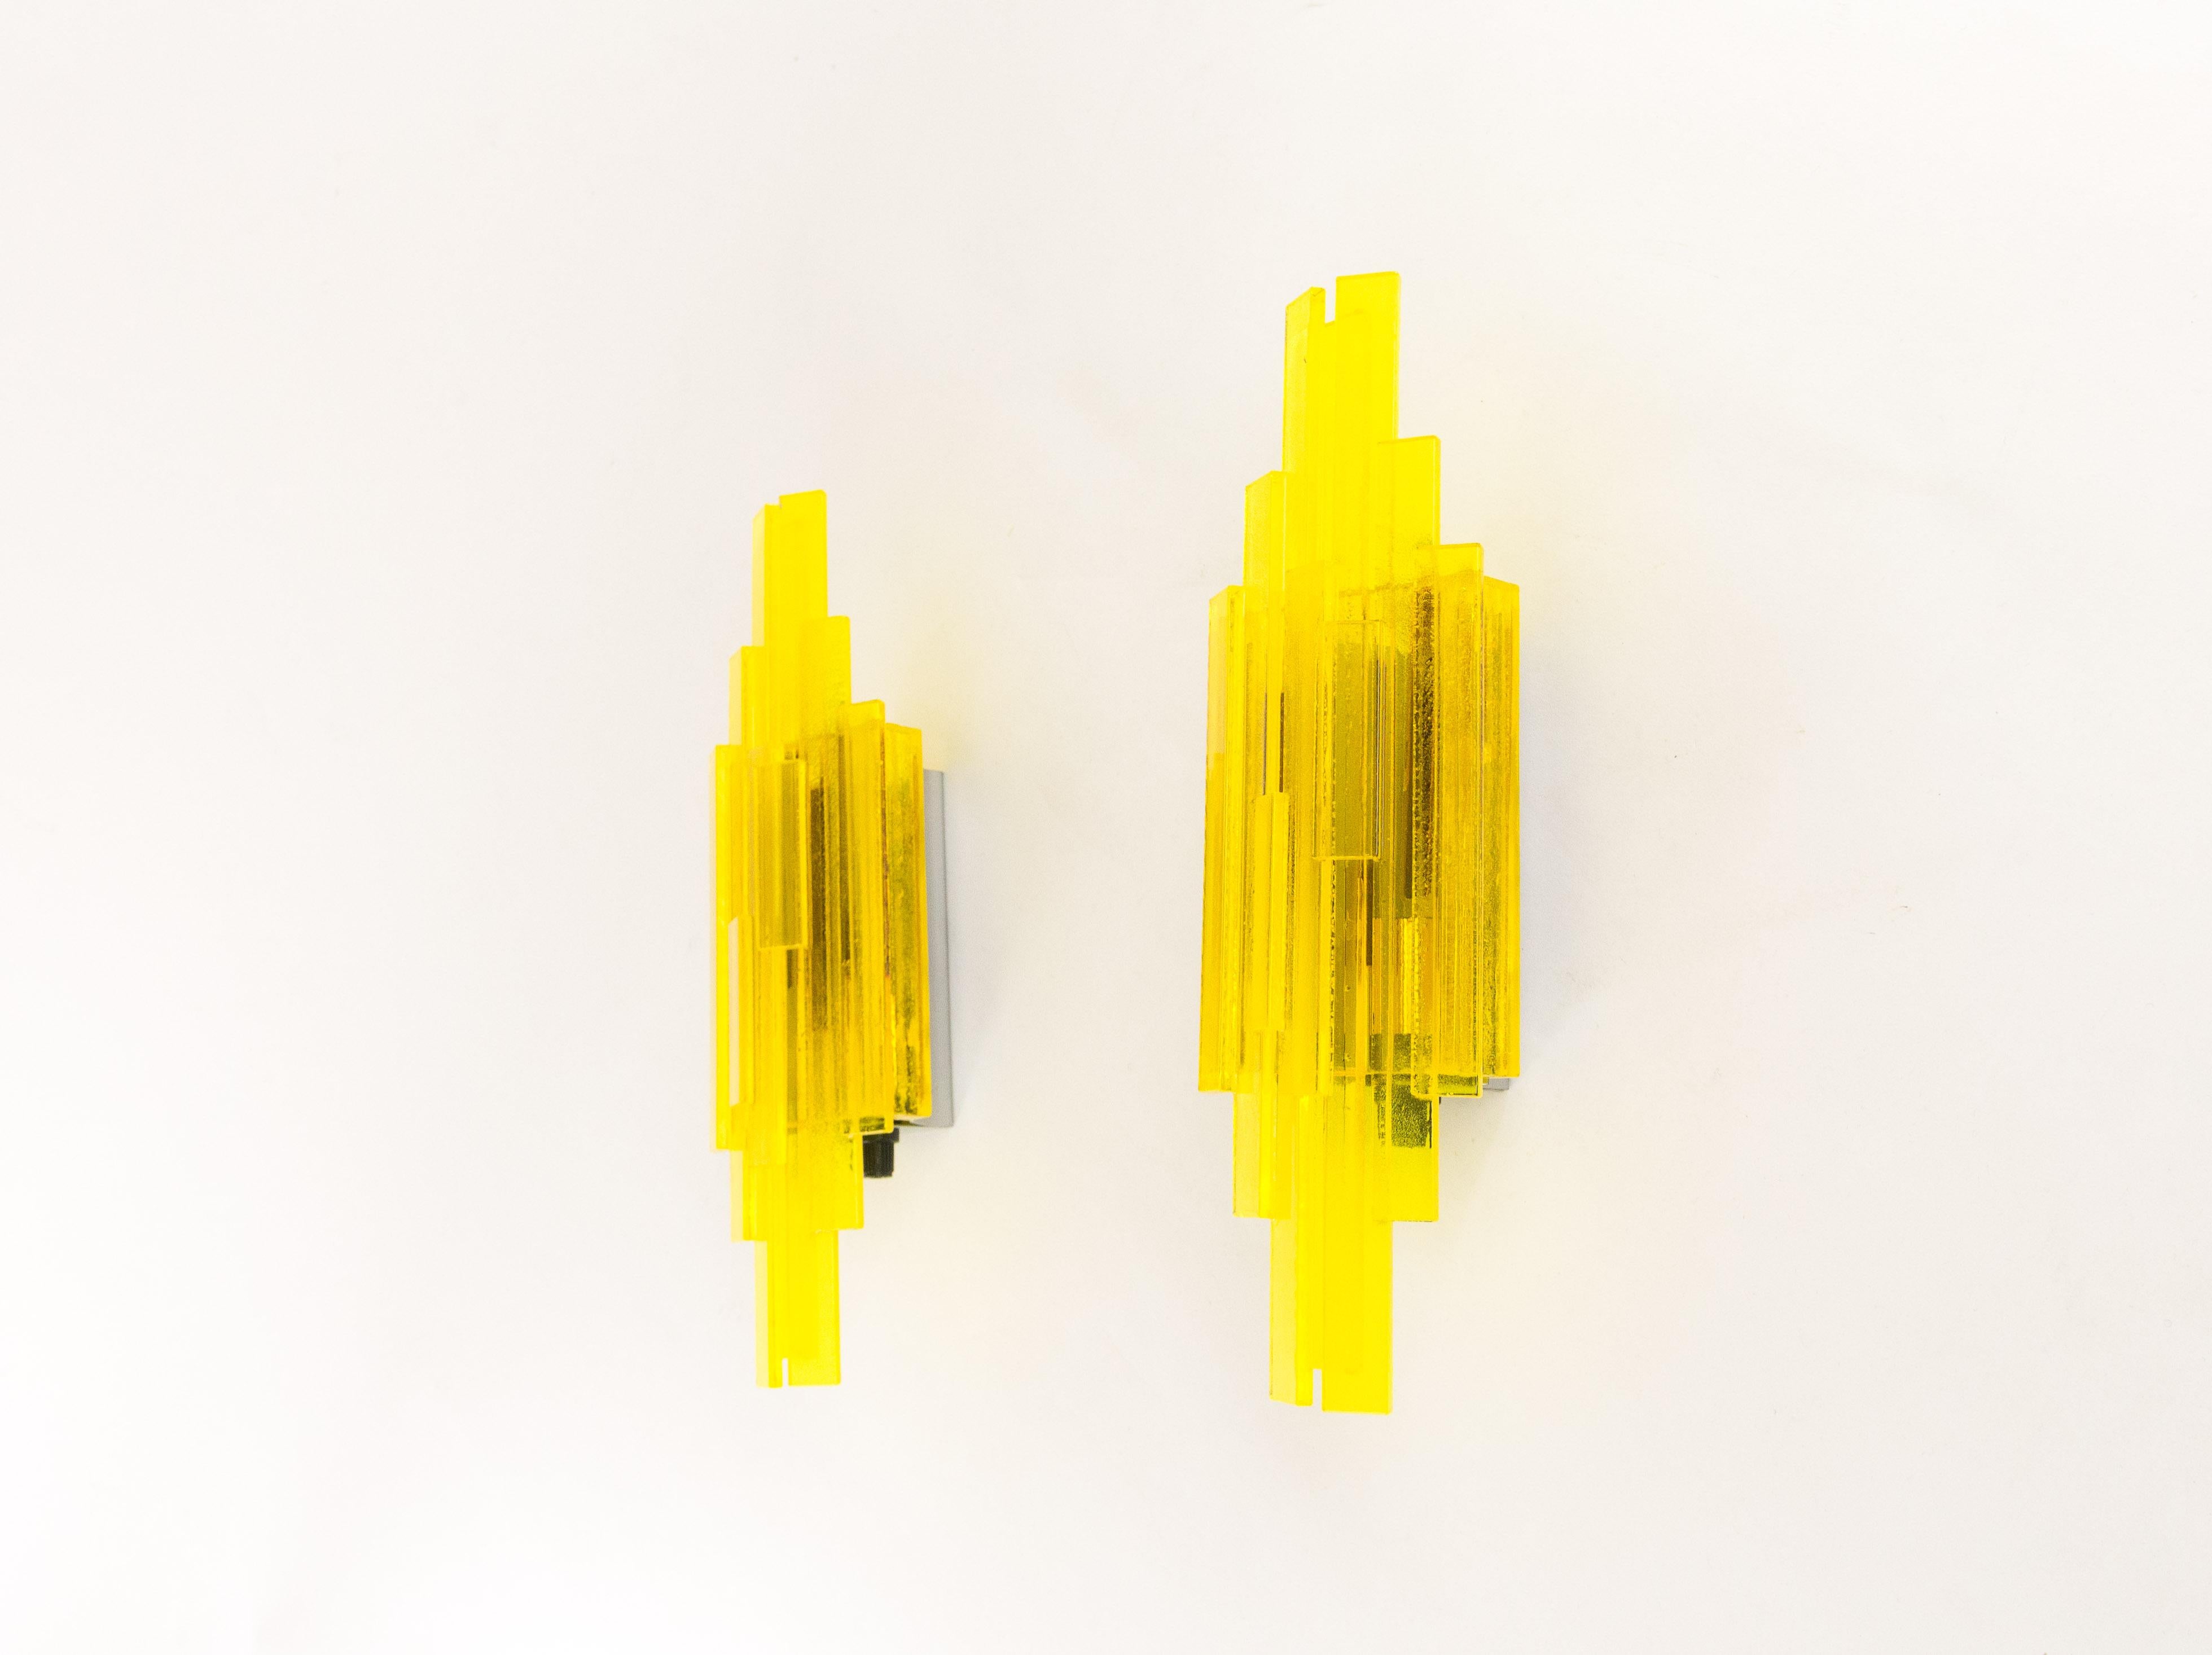 A pair of yellow handmade acrylic wall lamps. The sconces were designed by Claus Bolby and manufactured by his own company, Cebo industry. By experimenting, Bolby discovered a technique allowing him to introduce bubbles into the acrylic, which adds